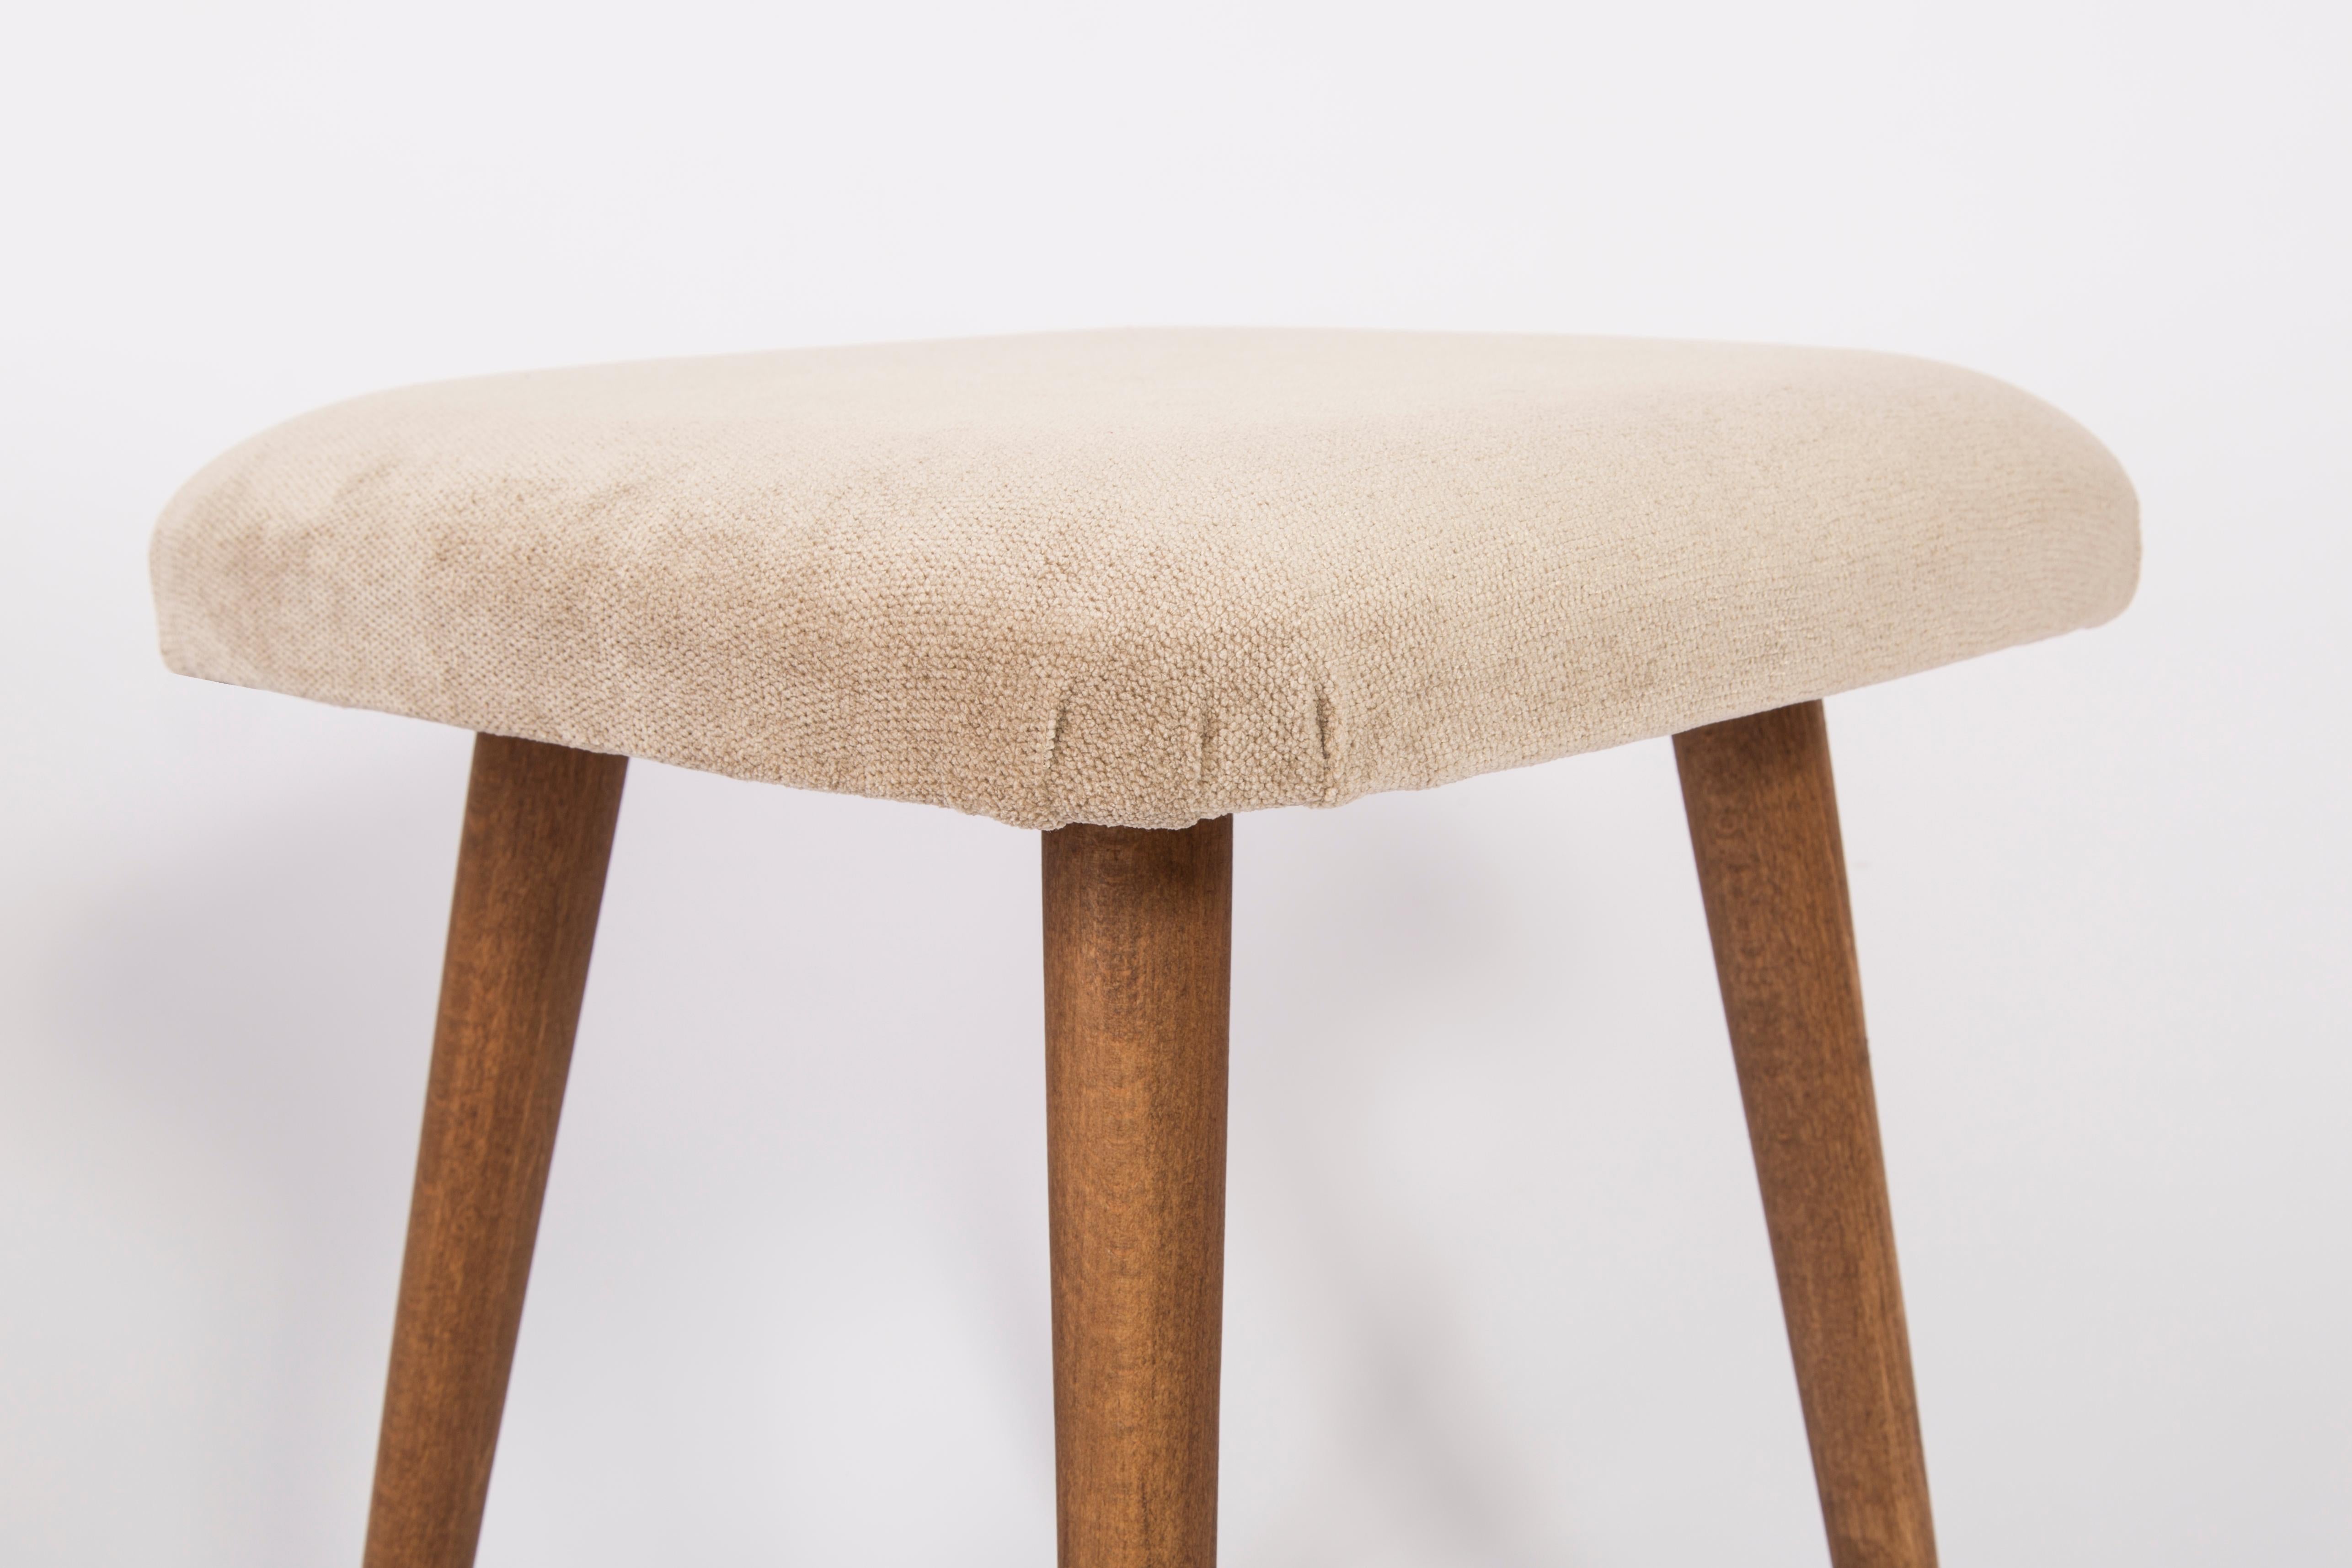 Hand-Crafted Pair of Beige Stools, 1960s For Sale